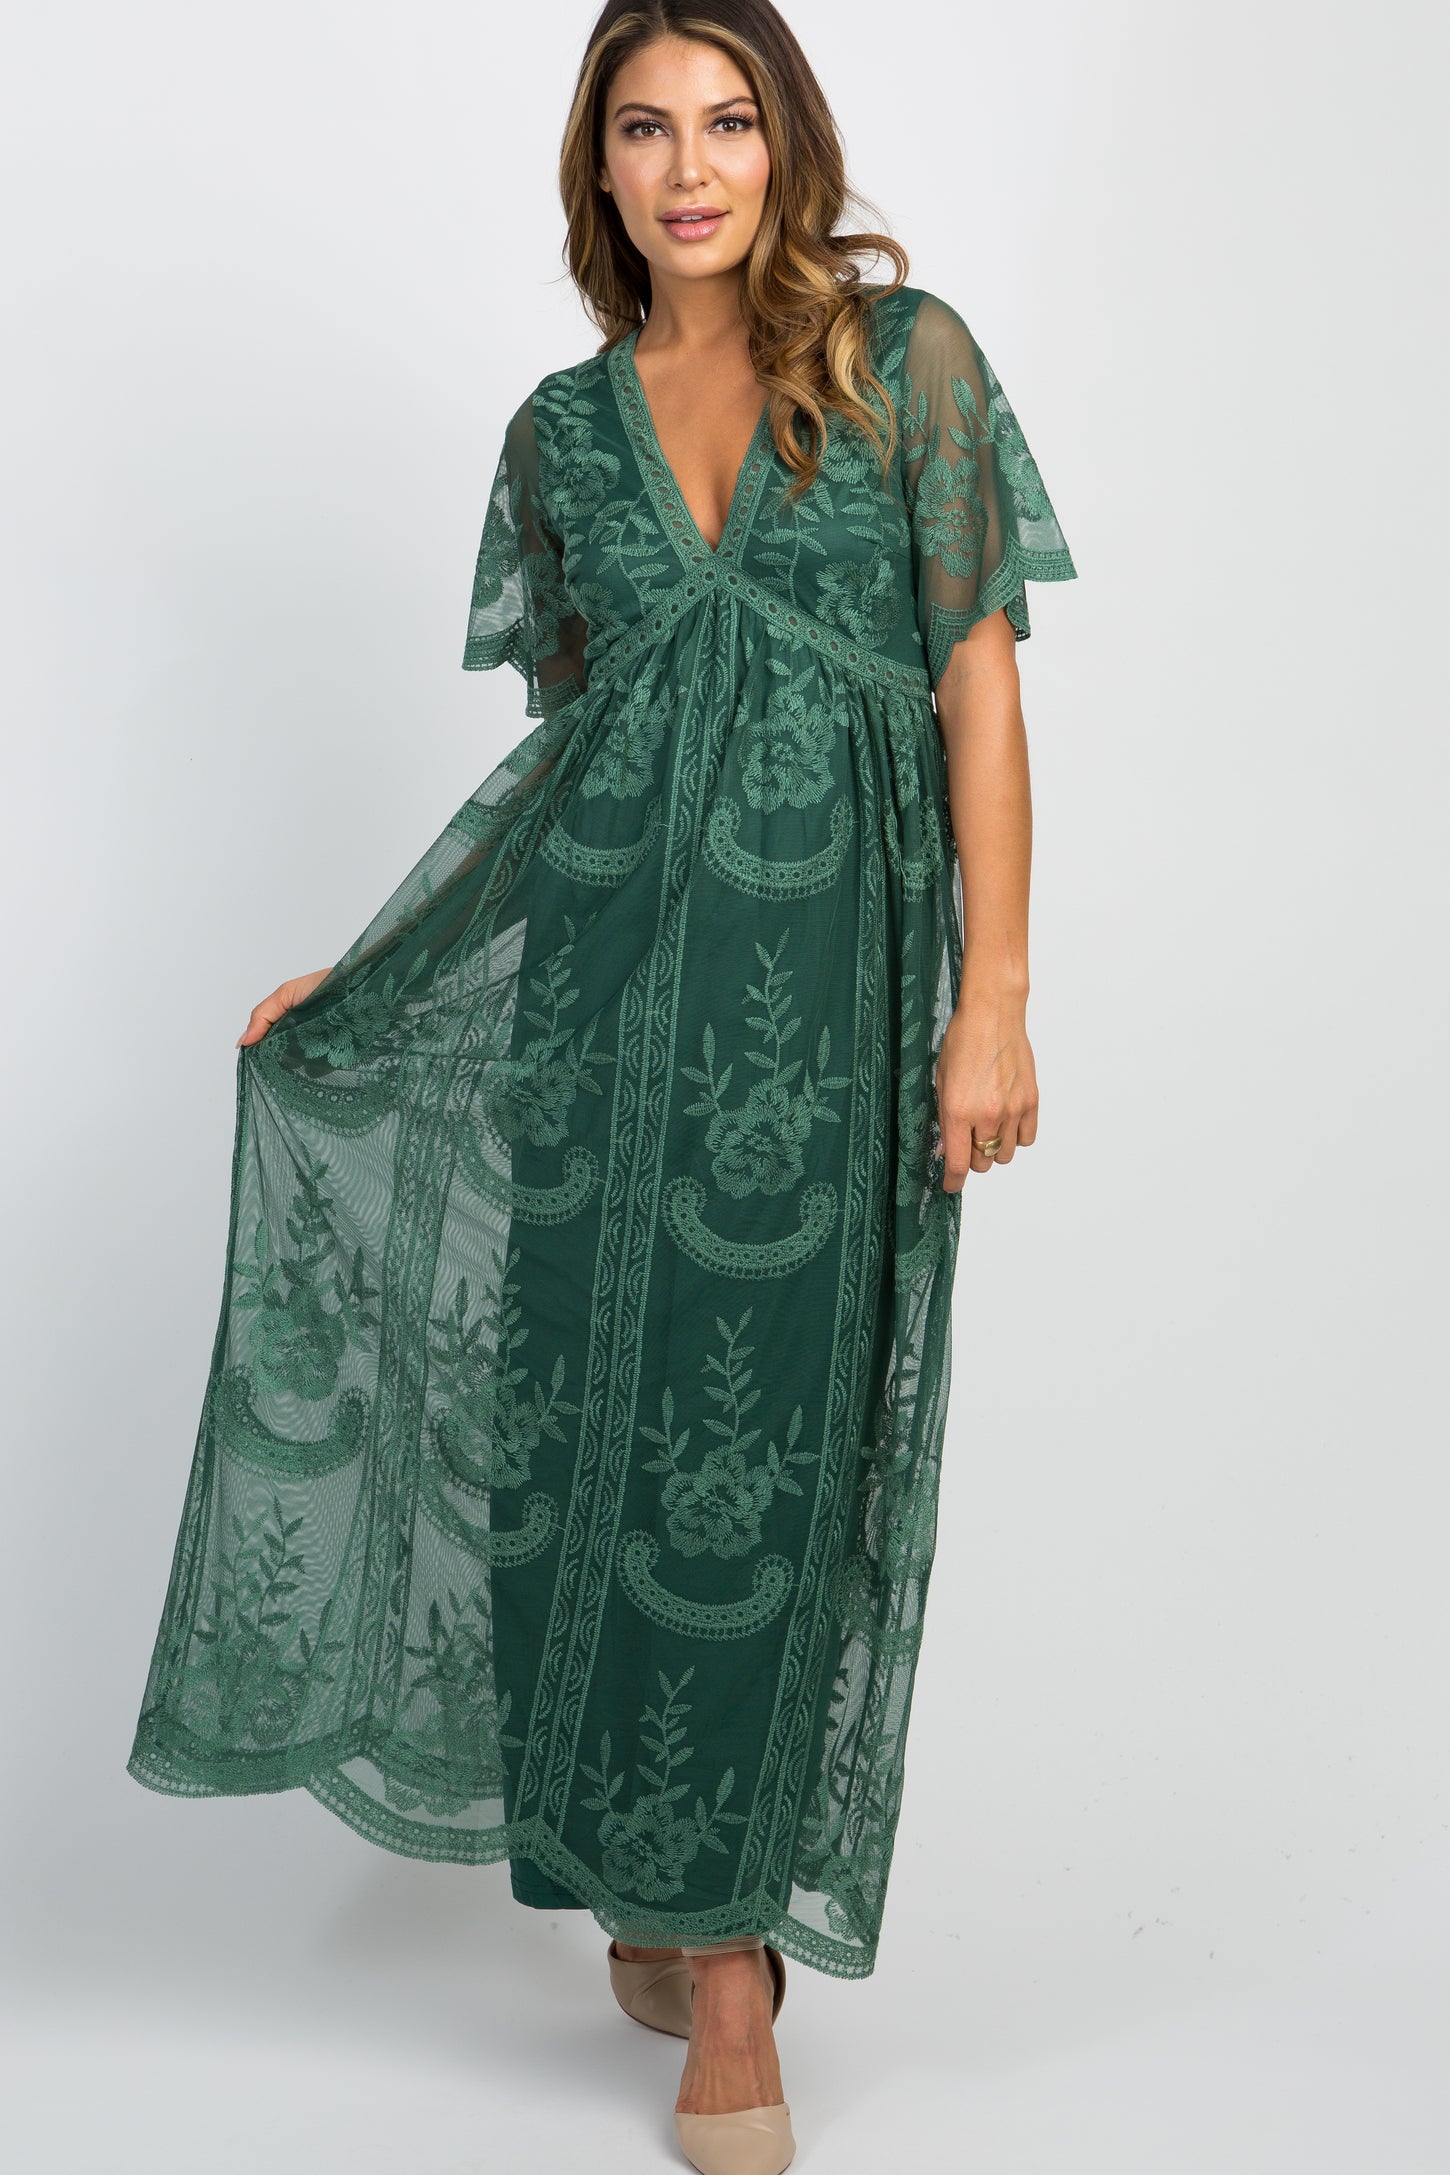 Teal Green Lace Mesh Overlay Maternity Maxi Dress